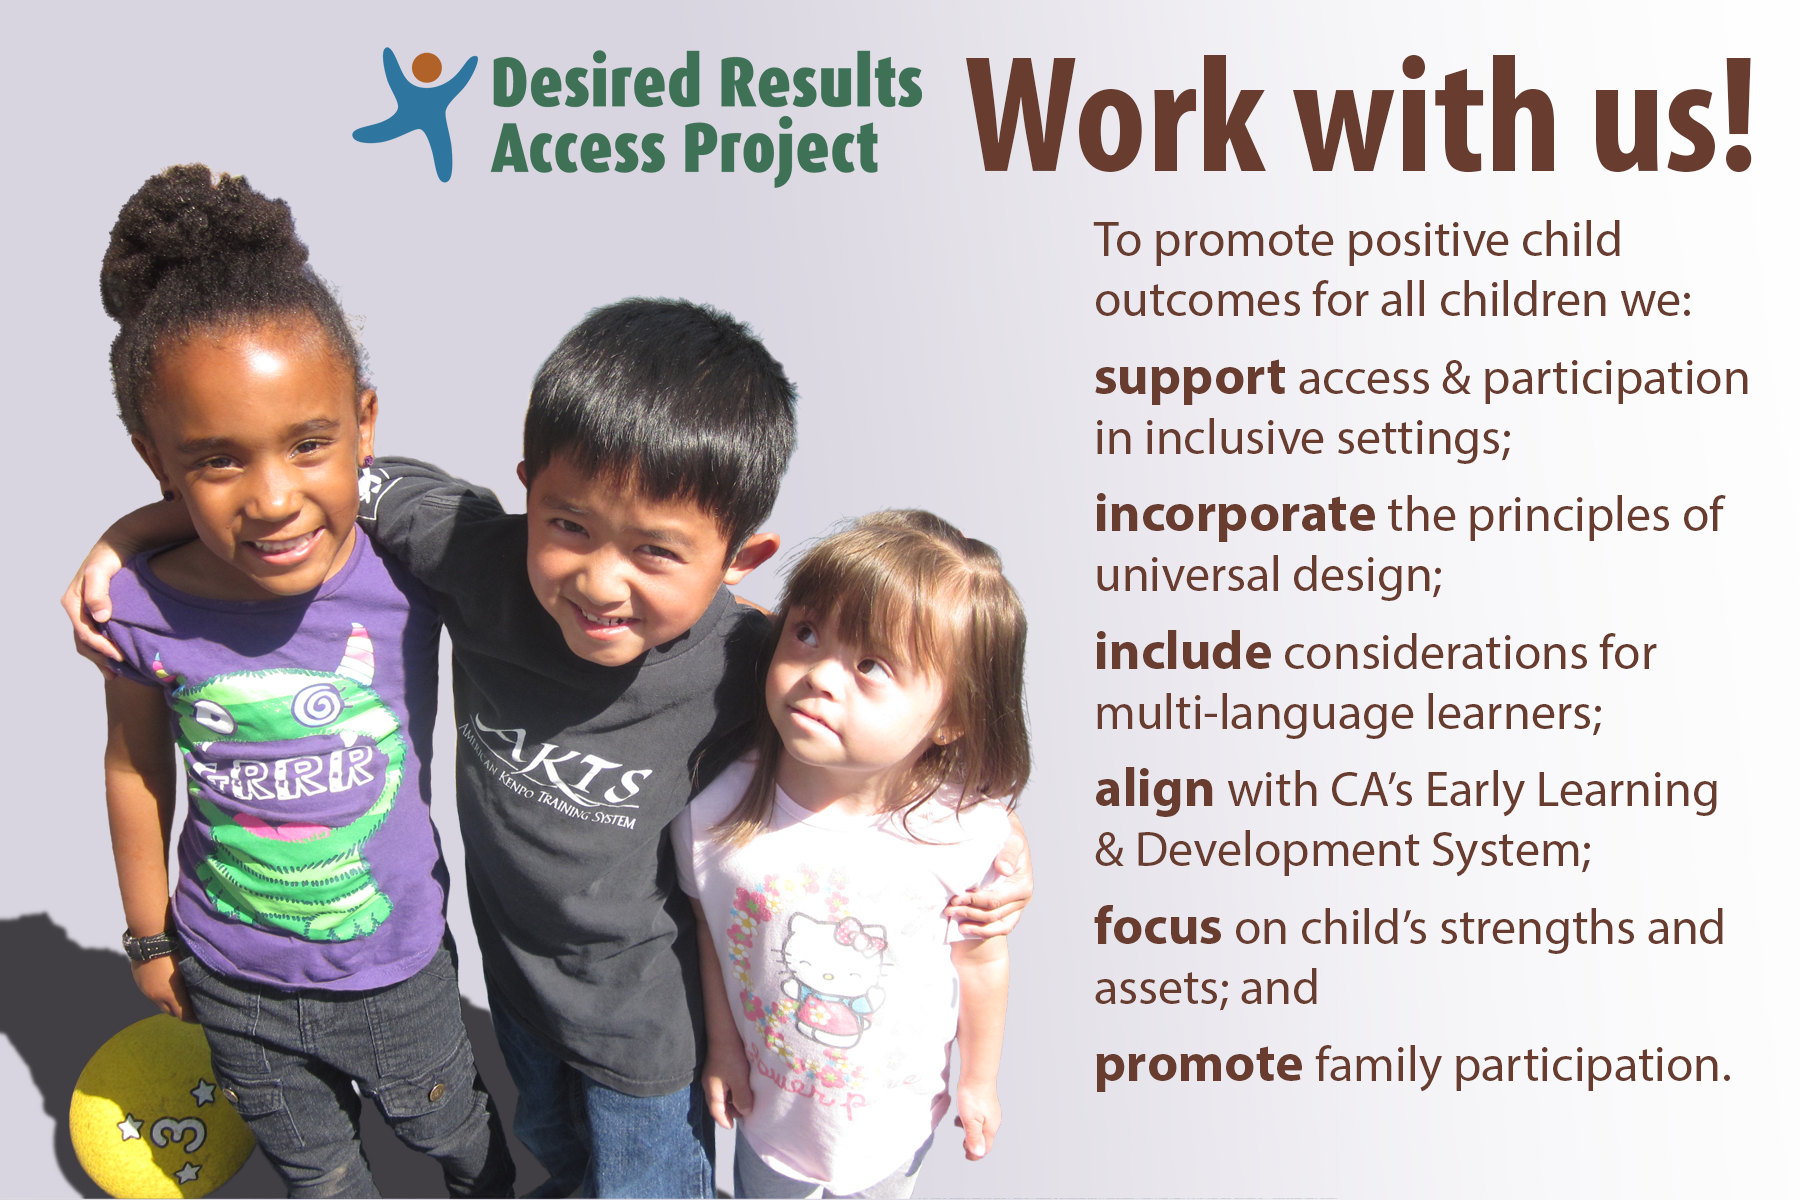 Desired Result Access Project, Work with us! To promote positive child outcomes for all children we: support access and participation in inclusive settings, incorporate the principles of universal design, include considerations for multi-language learners, align with California's Early Learning and Development System, focus on child's strengths and assets, and promote family participation